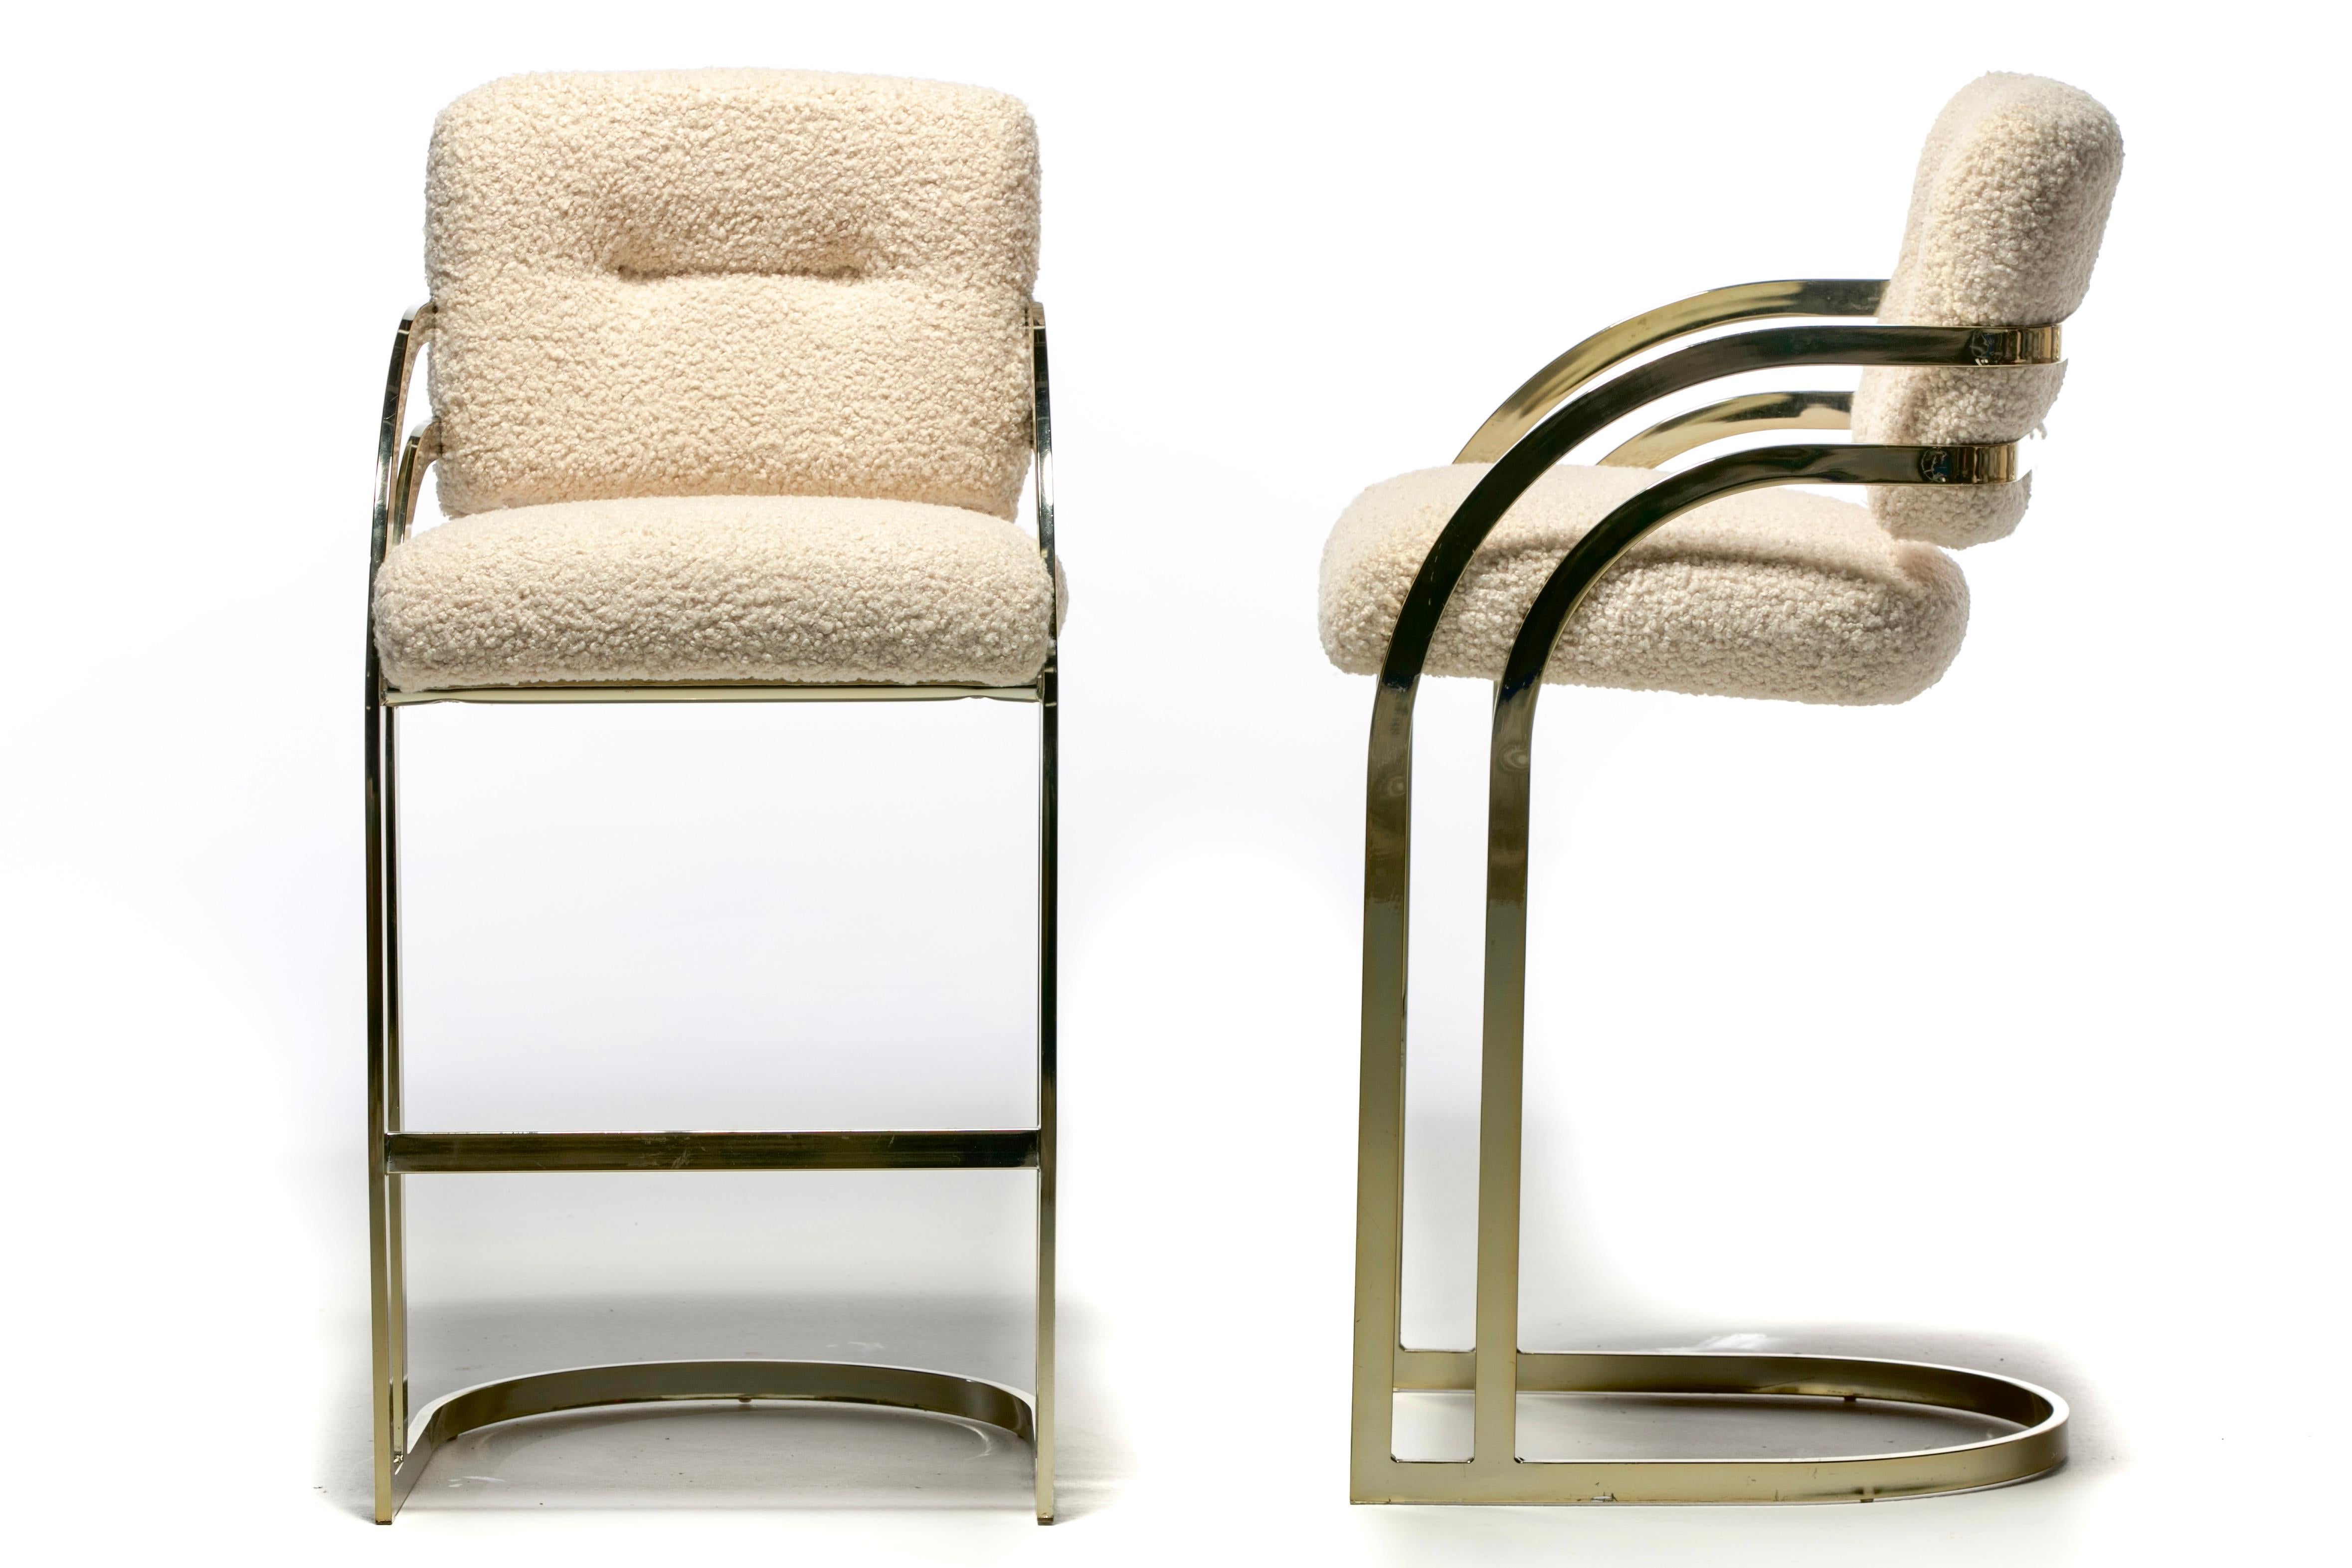 Elegant and luxurious set of four cantilevered brass stools in the style of Milo Baughman made by Design Institute of America (